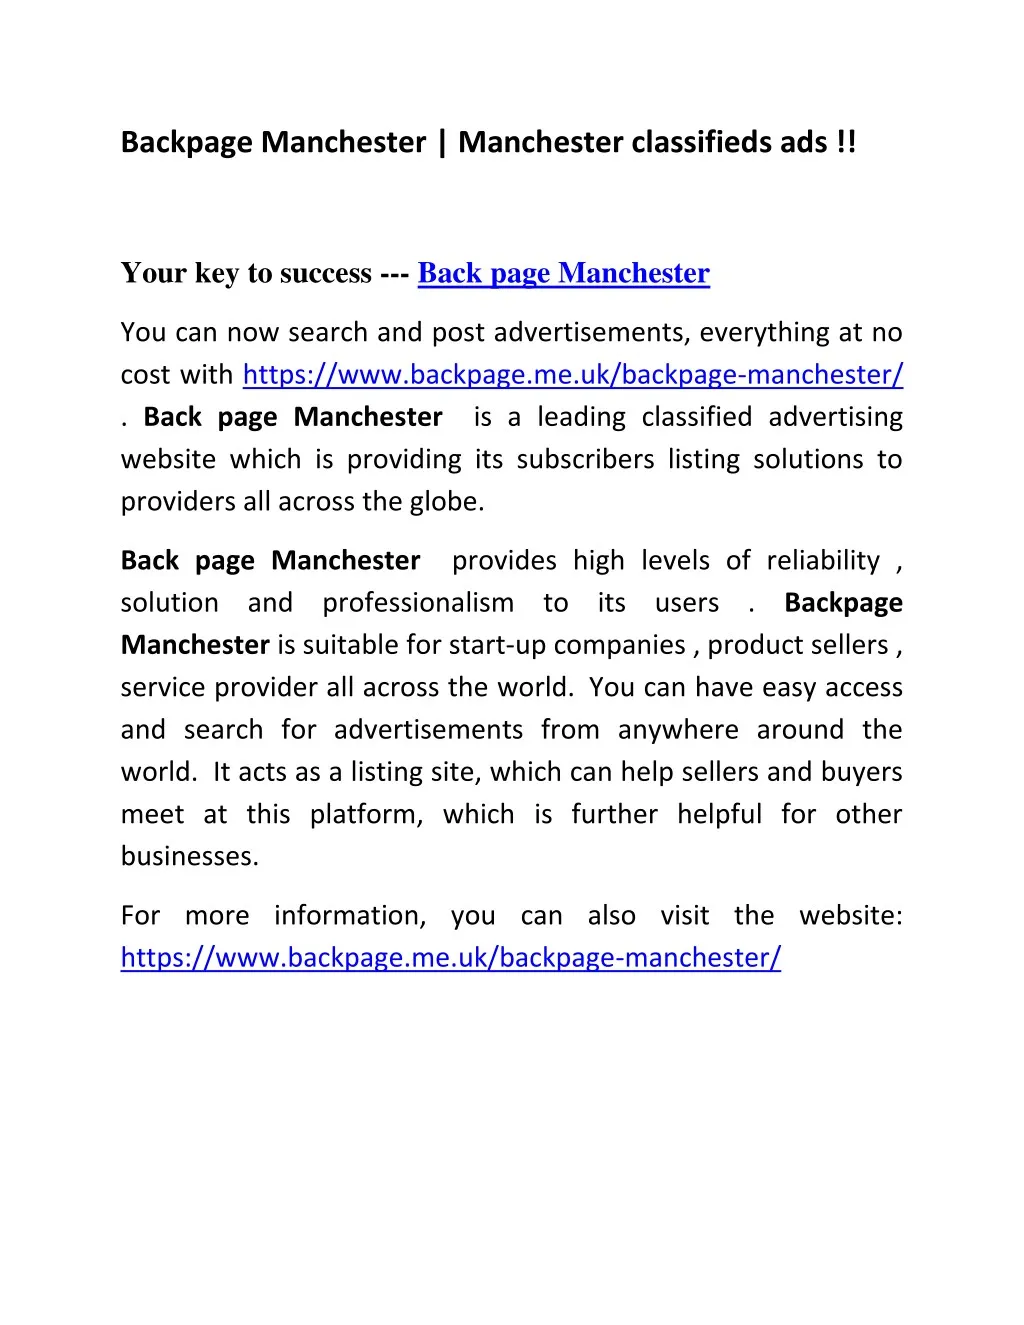 backpage manchester manchester classifieds ads